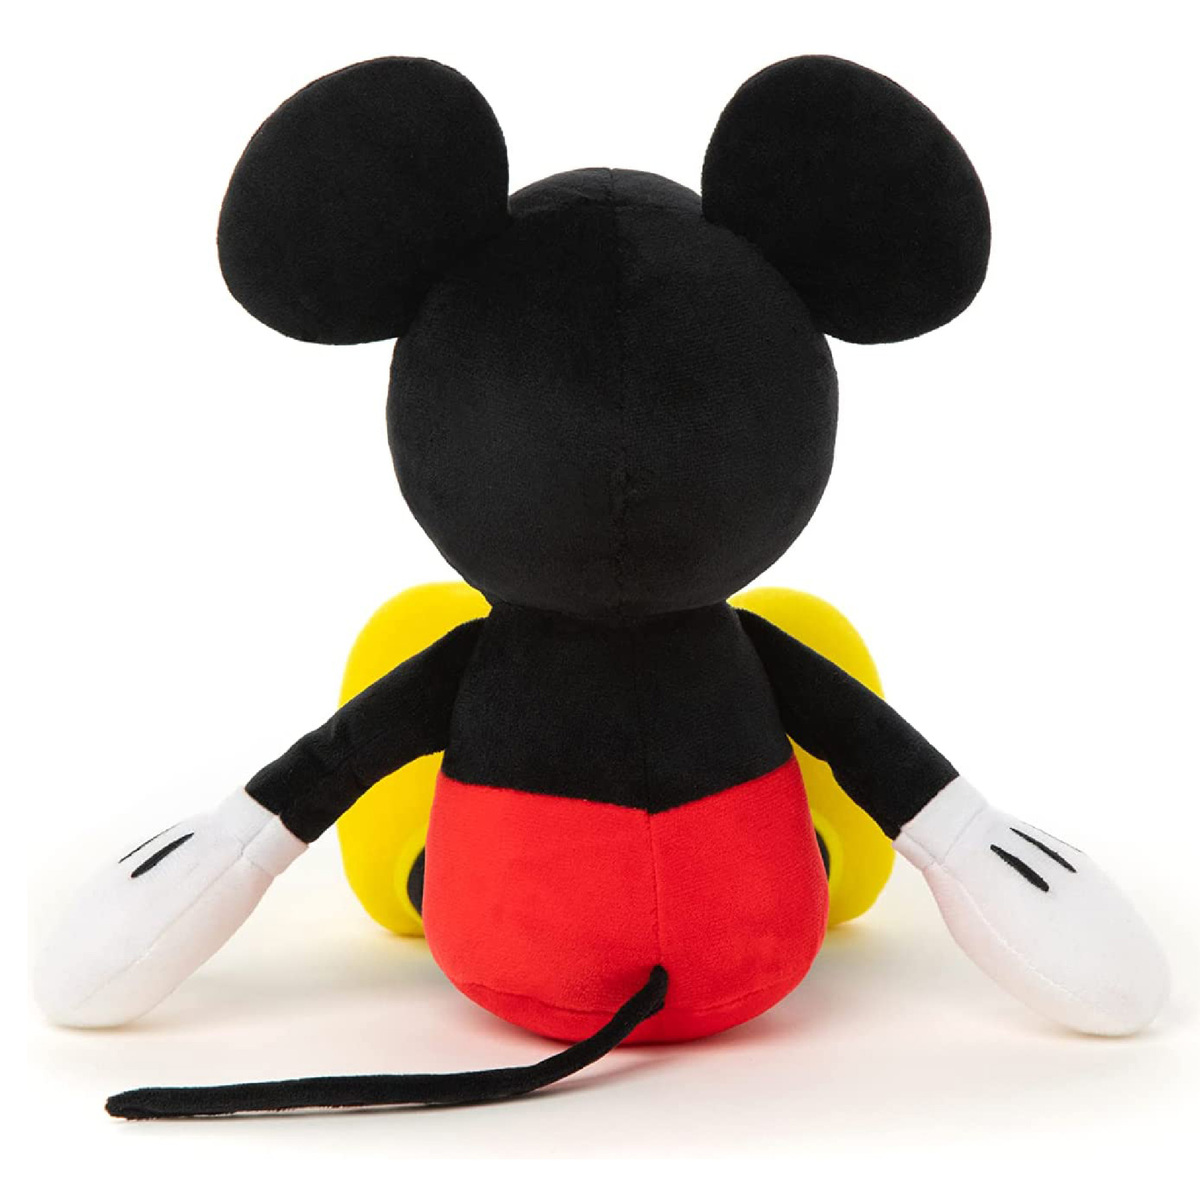 Disney Mickey Classic Plush Toy 13 inches, AG2102286